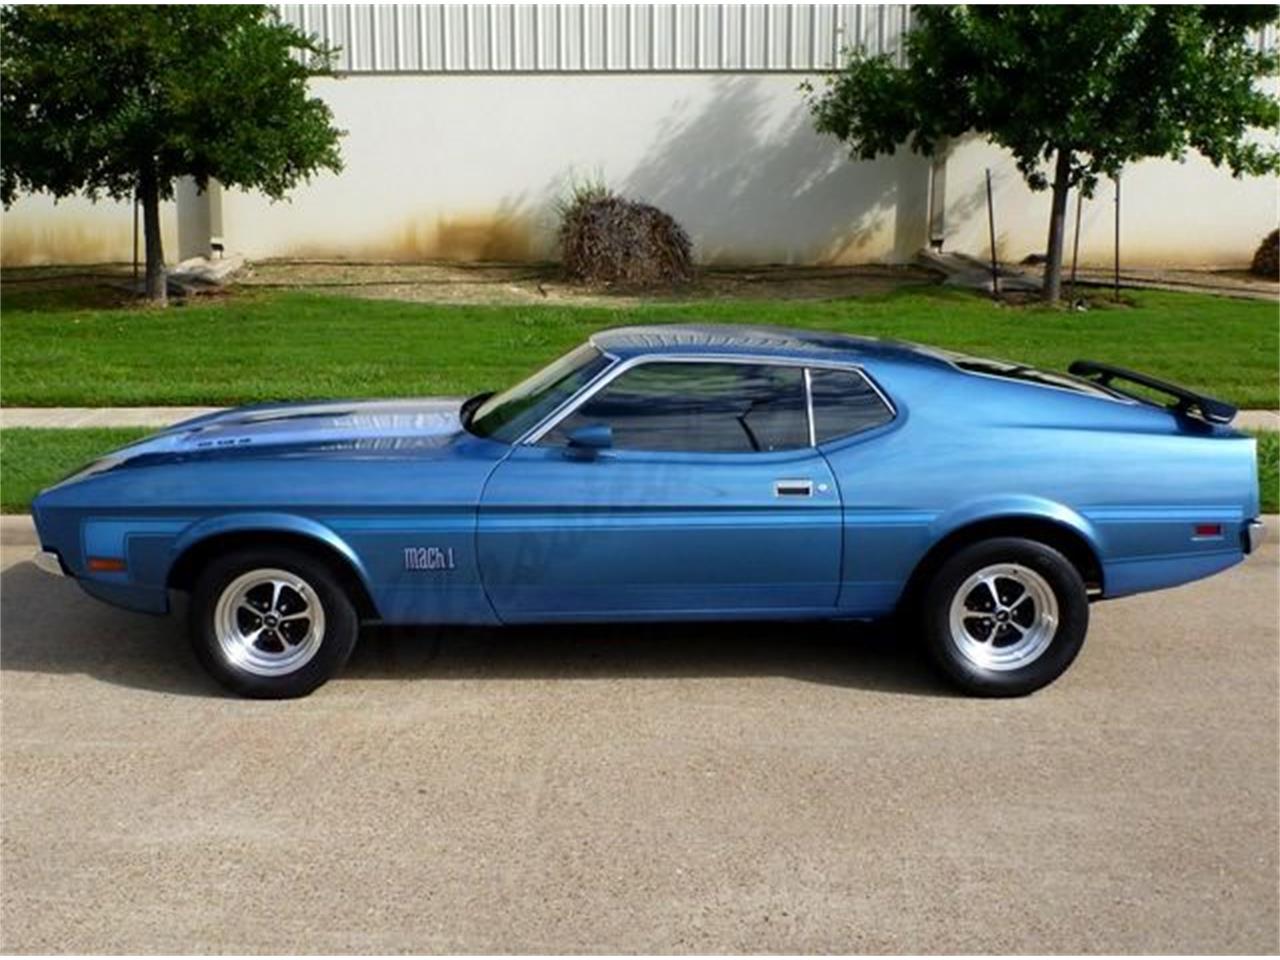 1971 Ford Mustang Mach 1 for Sale | ClassicCars.com | CC-1148206